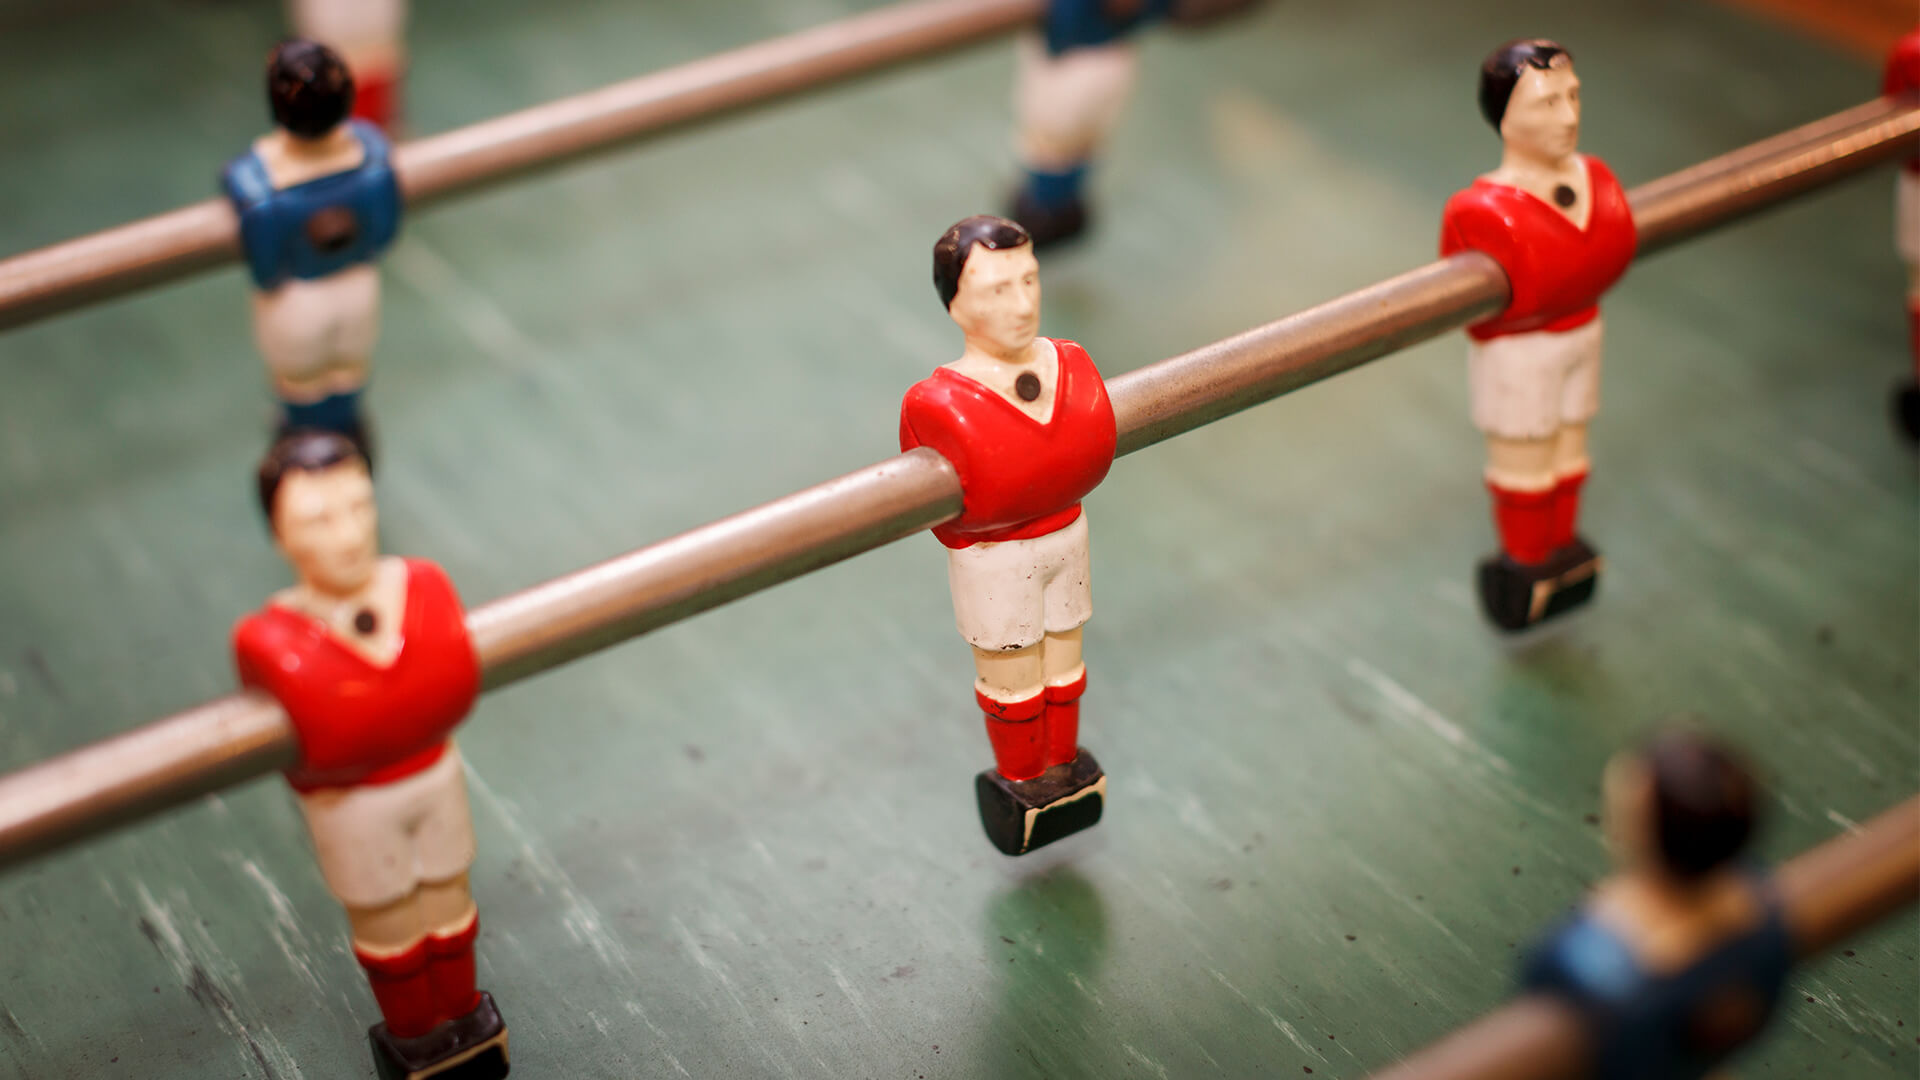 A close-up of the 'Foosball' table in the OneFiveSeven basement area